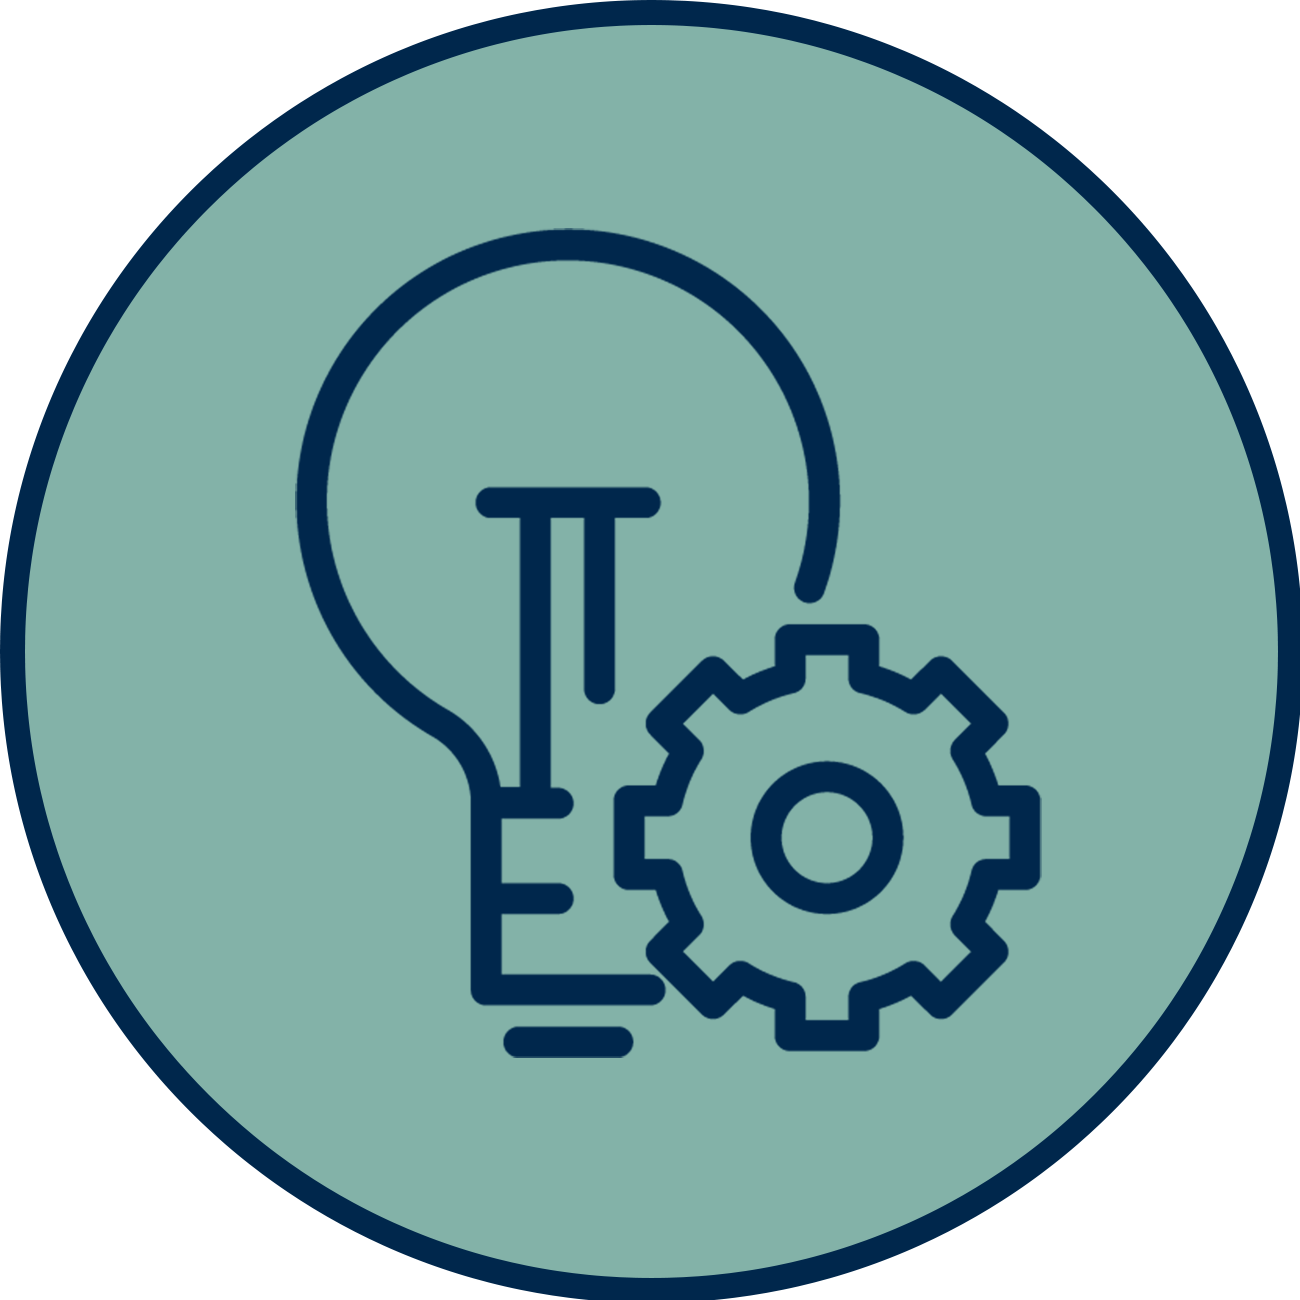 Icon of a gear and a light bulb. Industry Innovation by Philipp Petzka from the Noun Project